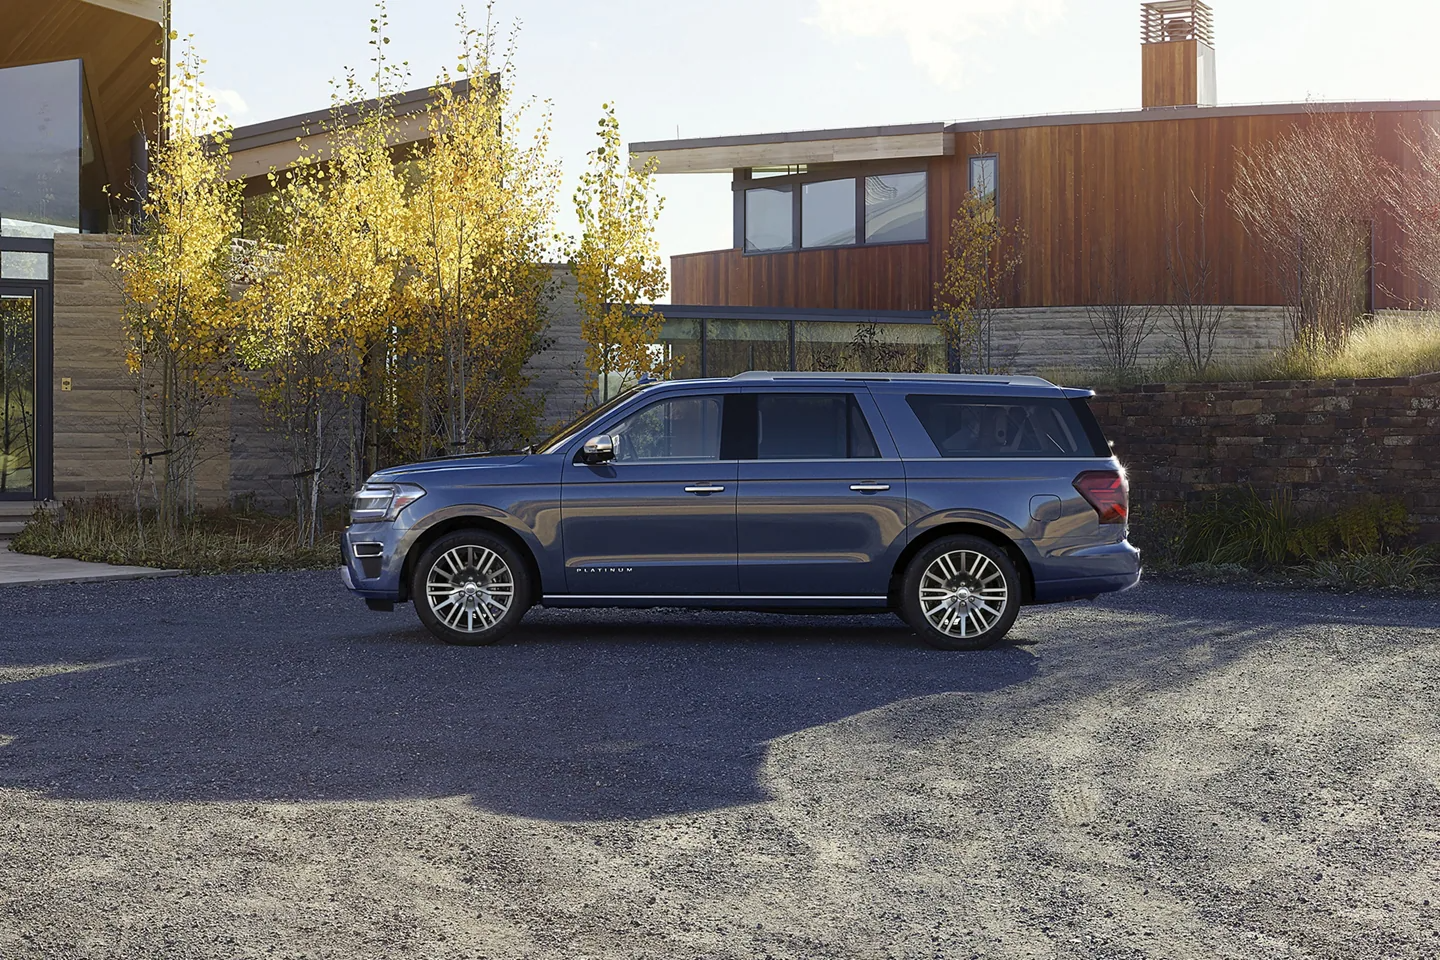 2023 Ford Expedition Release near Bellevue